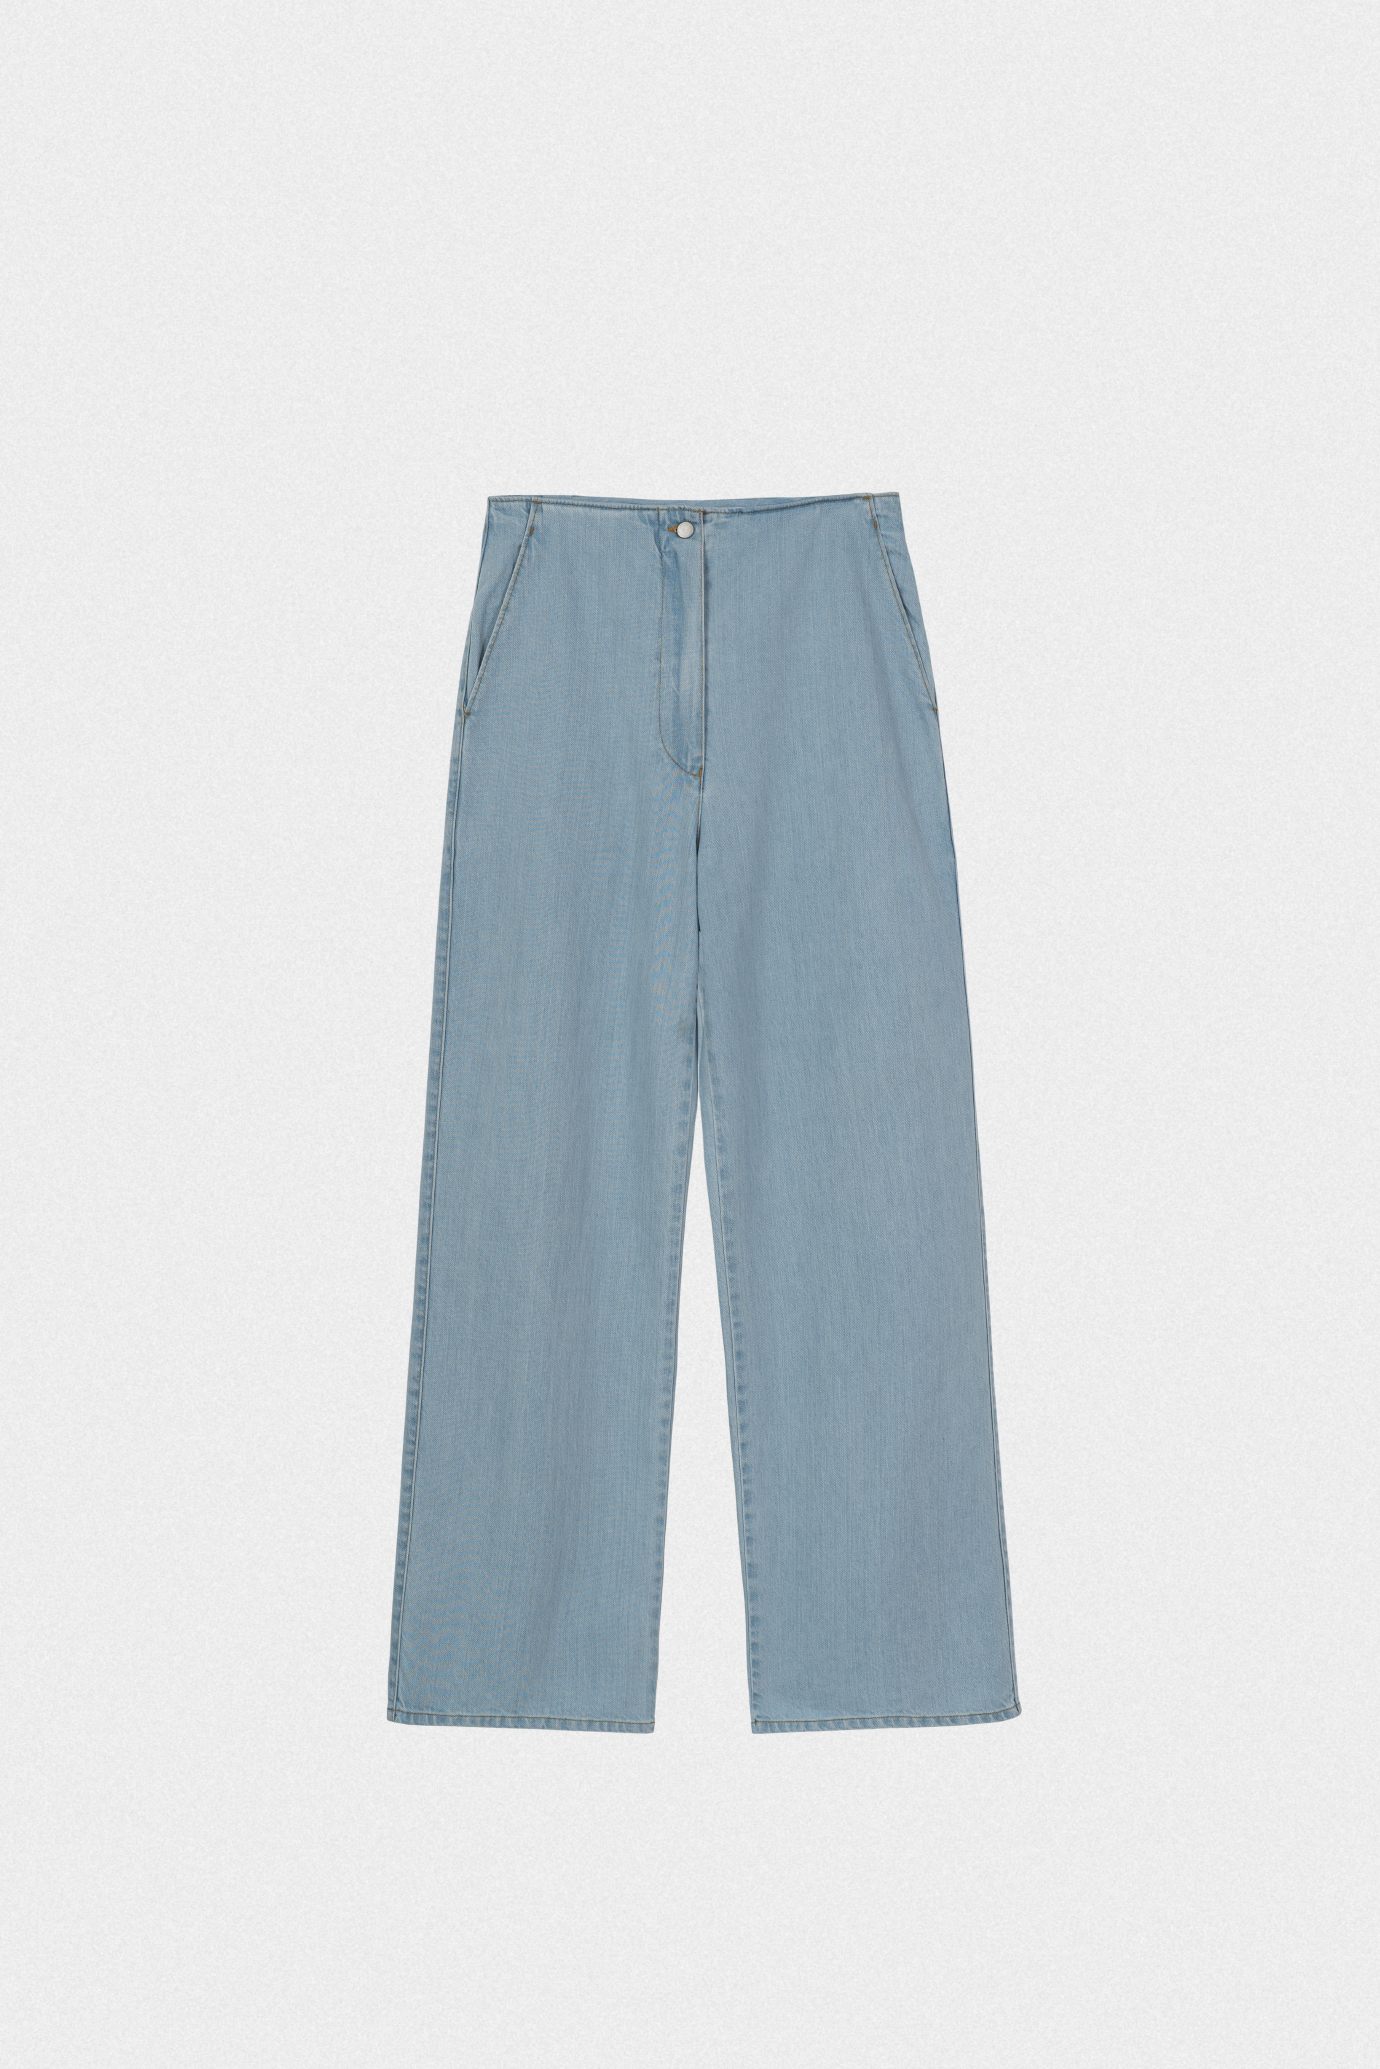 26882_90s Jeans